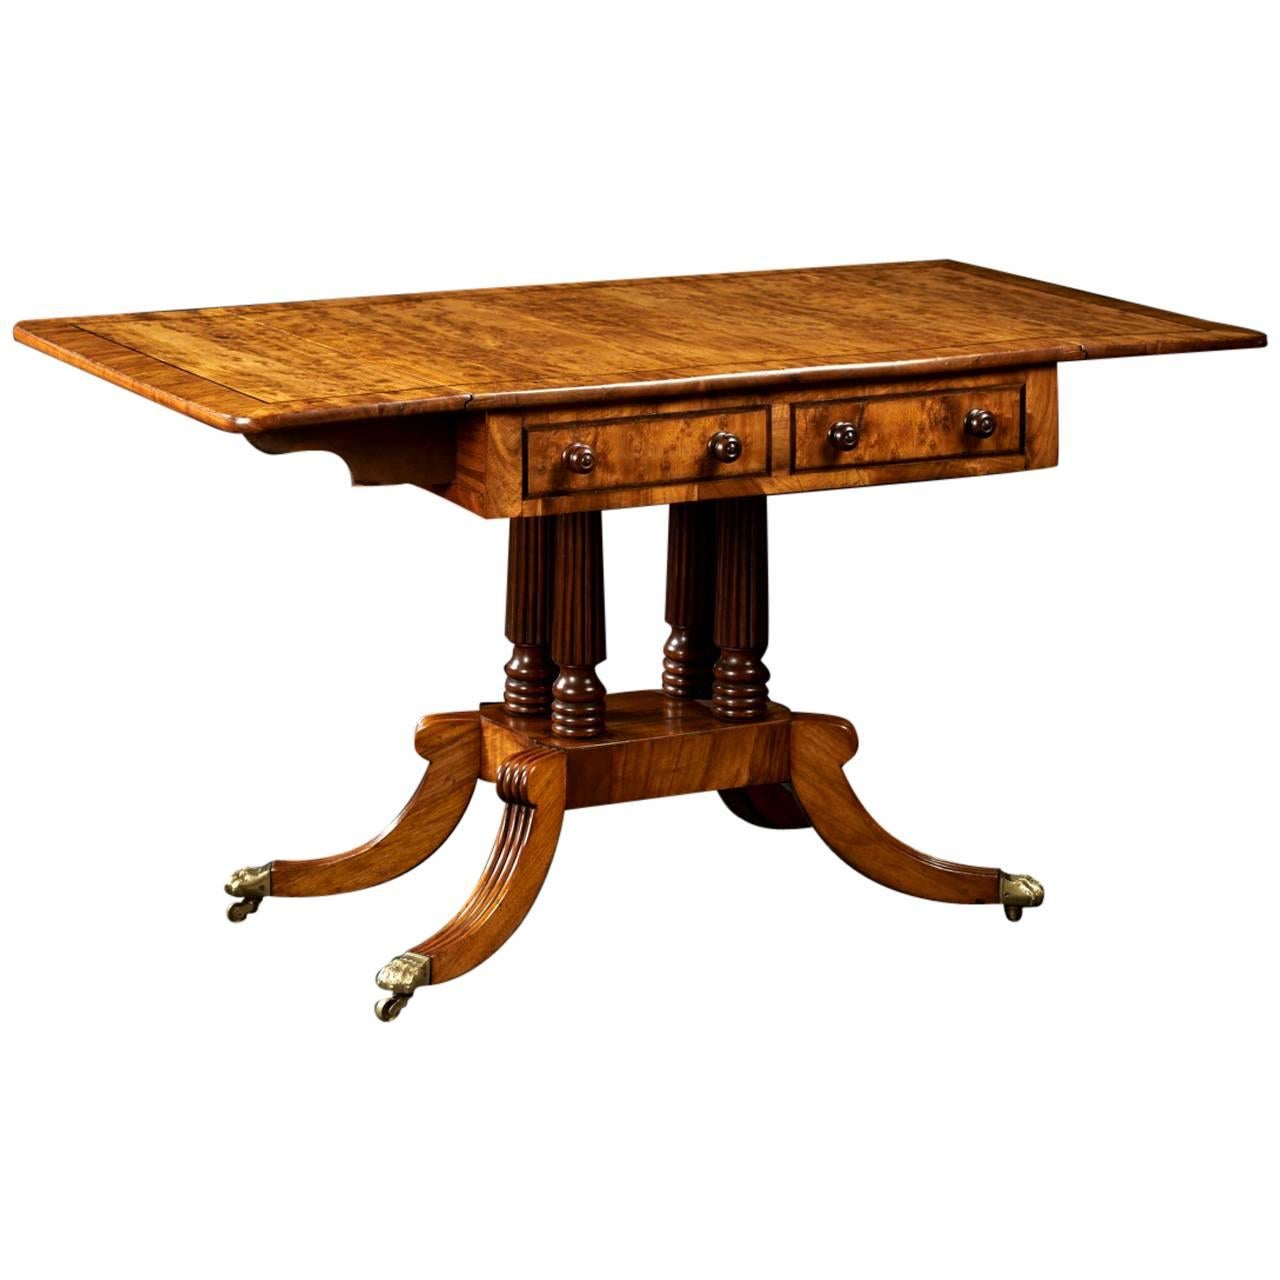 Beautiful English Regency Period Oak Library Table, circa 1810-1825 For Sale